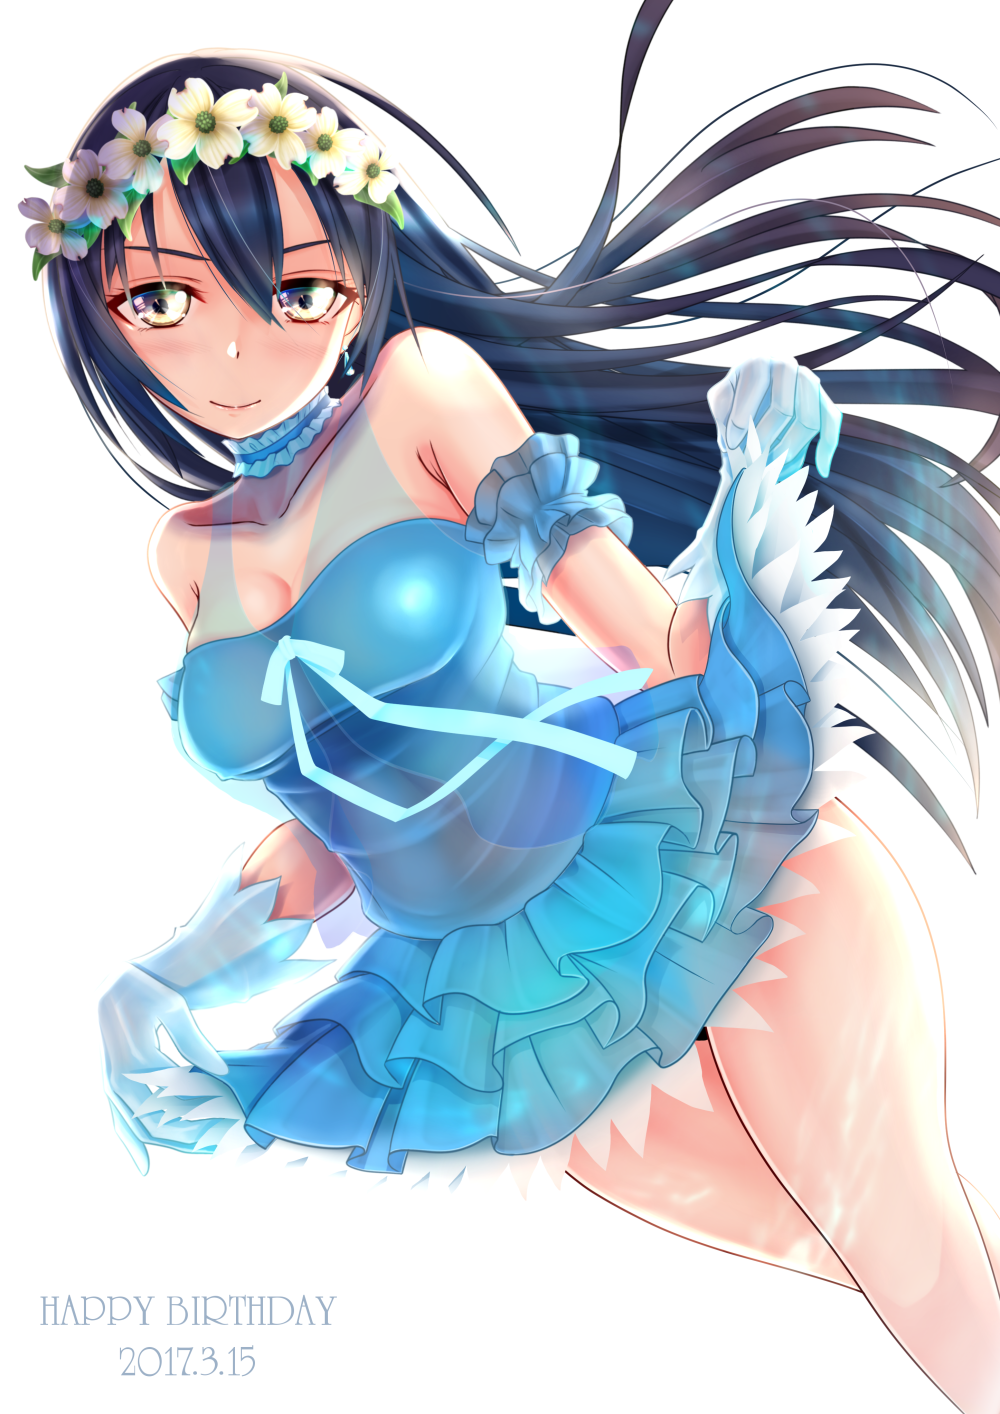 1girl bangs bare_shoulders birthday blue_hair character_name choker commentary_request cowboy_shot dated dress earrings eyebrows_visible_through_hair flower gloves hair_between_eyes hair_ornament happy_birthday head_wreath highres jewelry long_hair looking_at_viewer love_live! love_live!_school_idol_festival love_live!_school_idol_project simple_background skirt skirt_hold smile solo sonoda_umi white_background white_gloves yellow_eyes yume_no_tobira zakuro0508